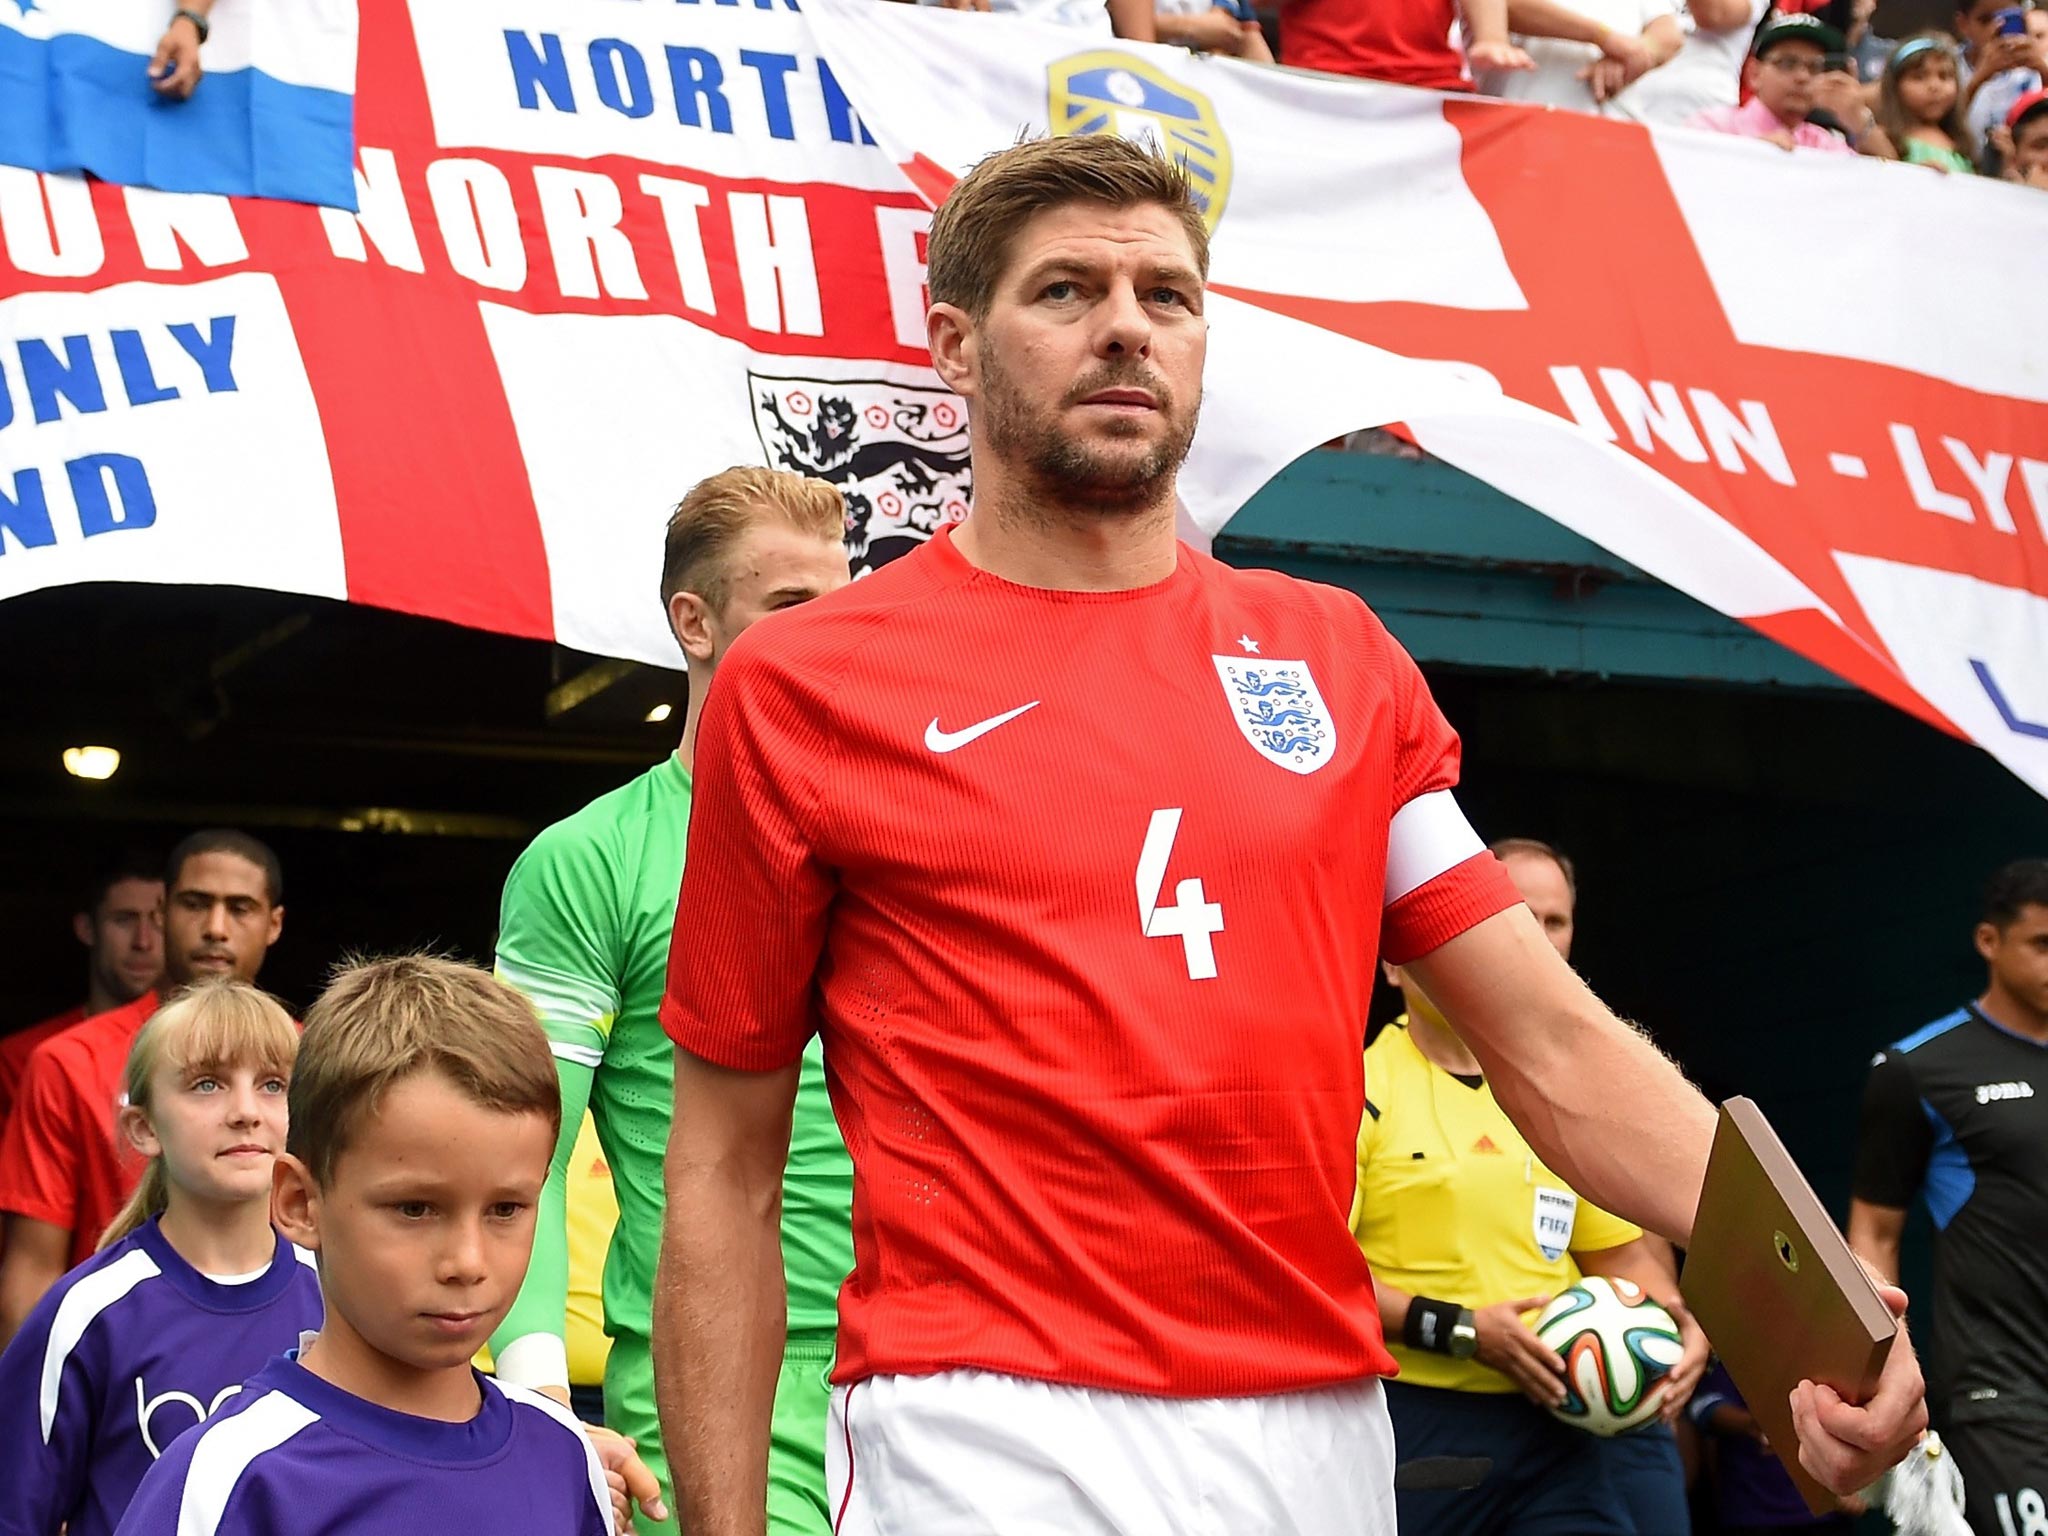 Steven Gerrard is urging his team to be attacking in their
World Cup opener against Italy tonight